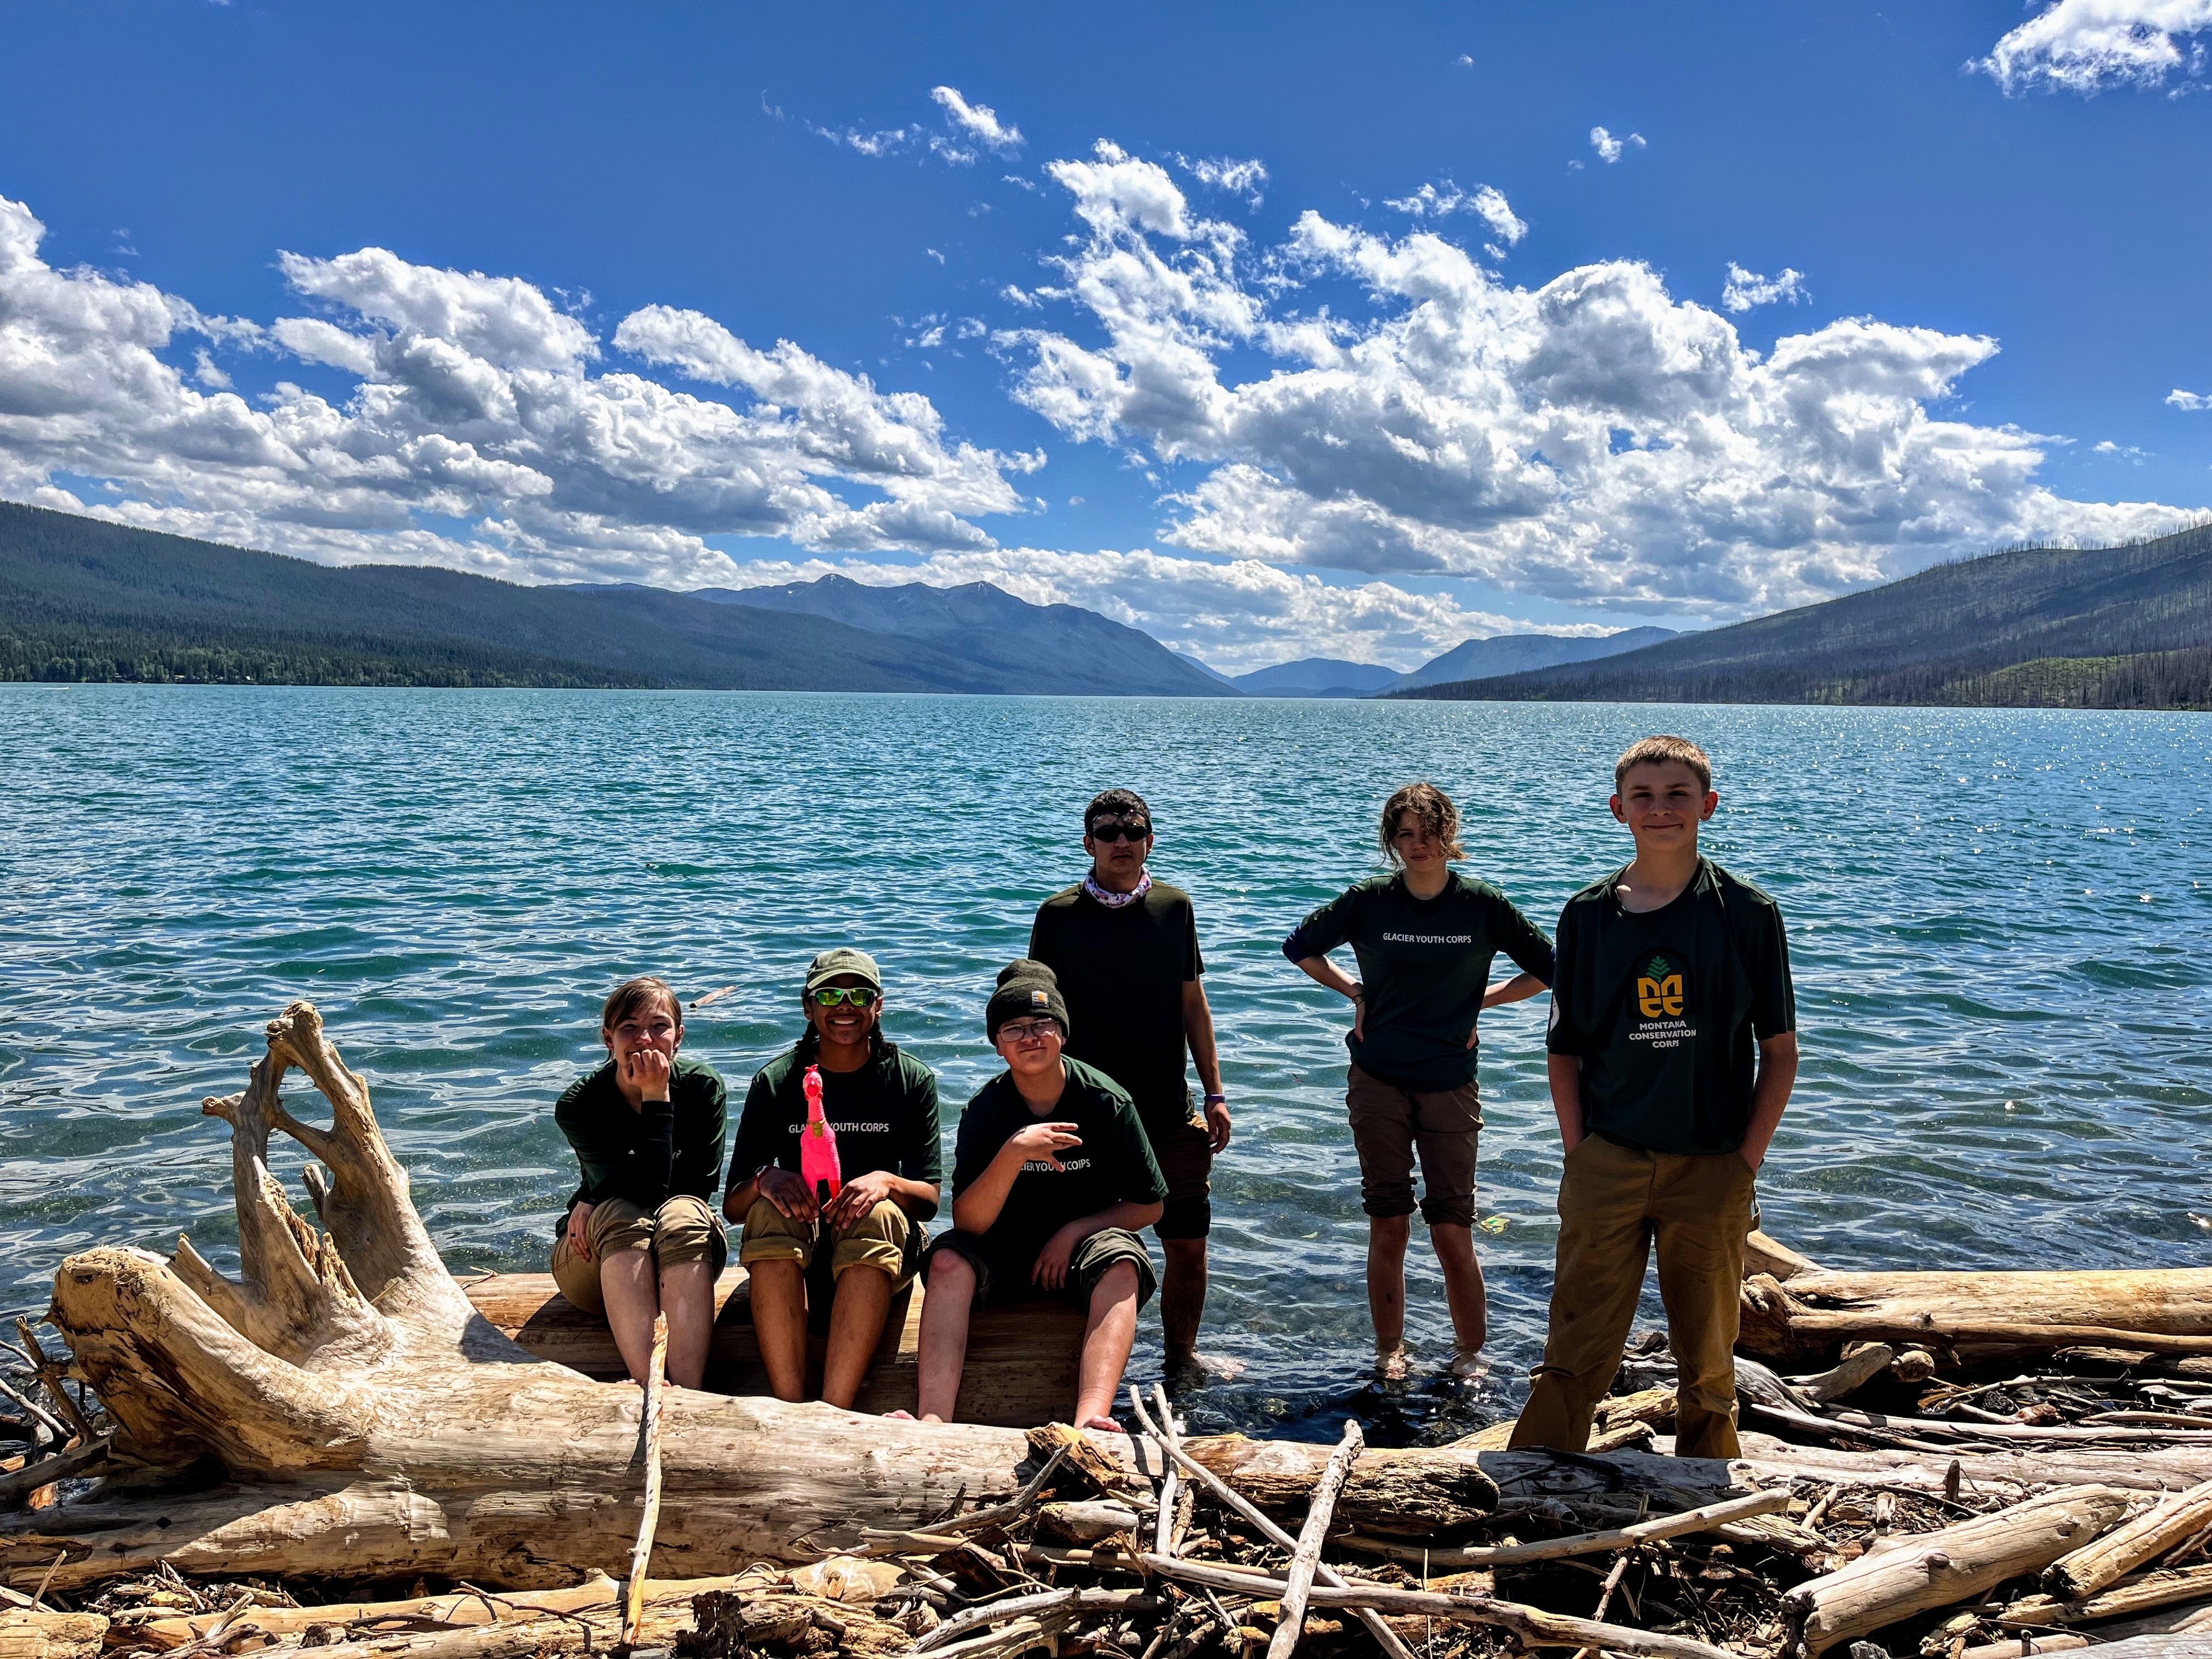 A youth crew sits, smiling on logs that border the edge of a large lake. One crew member is holding a pink rubber chicken.